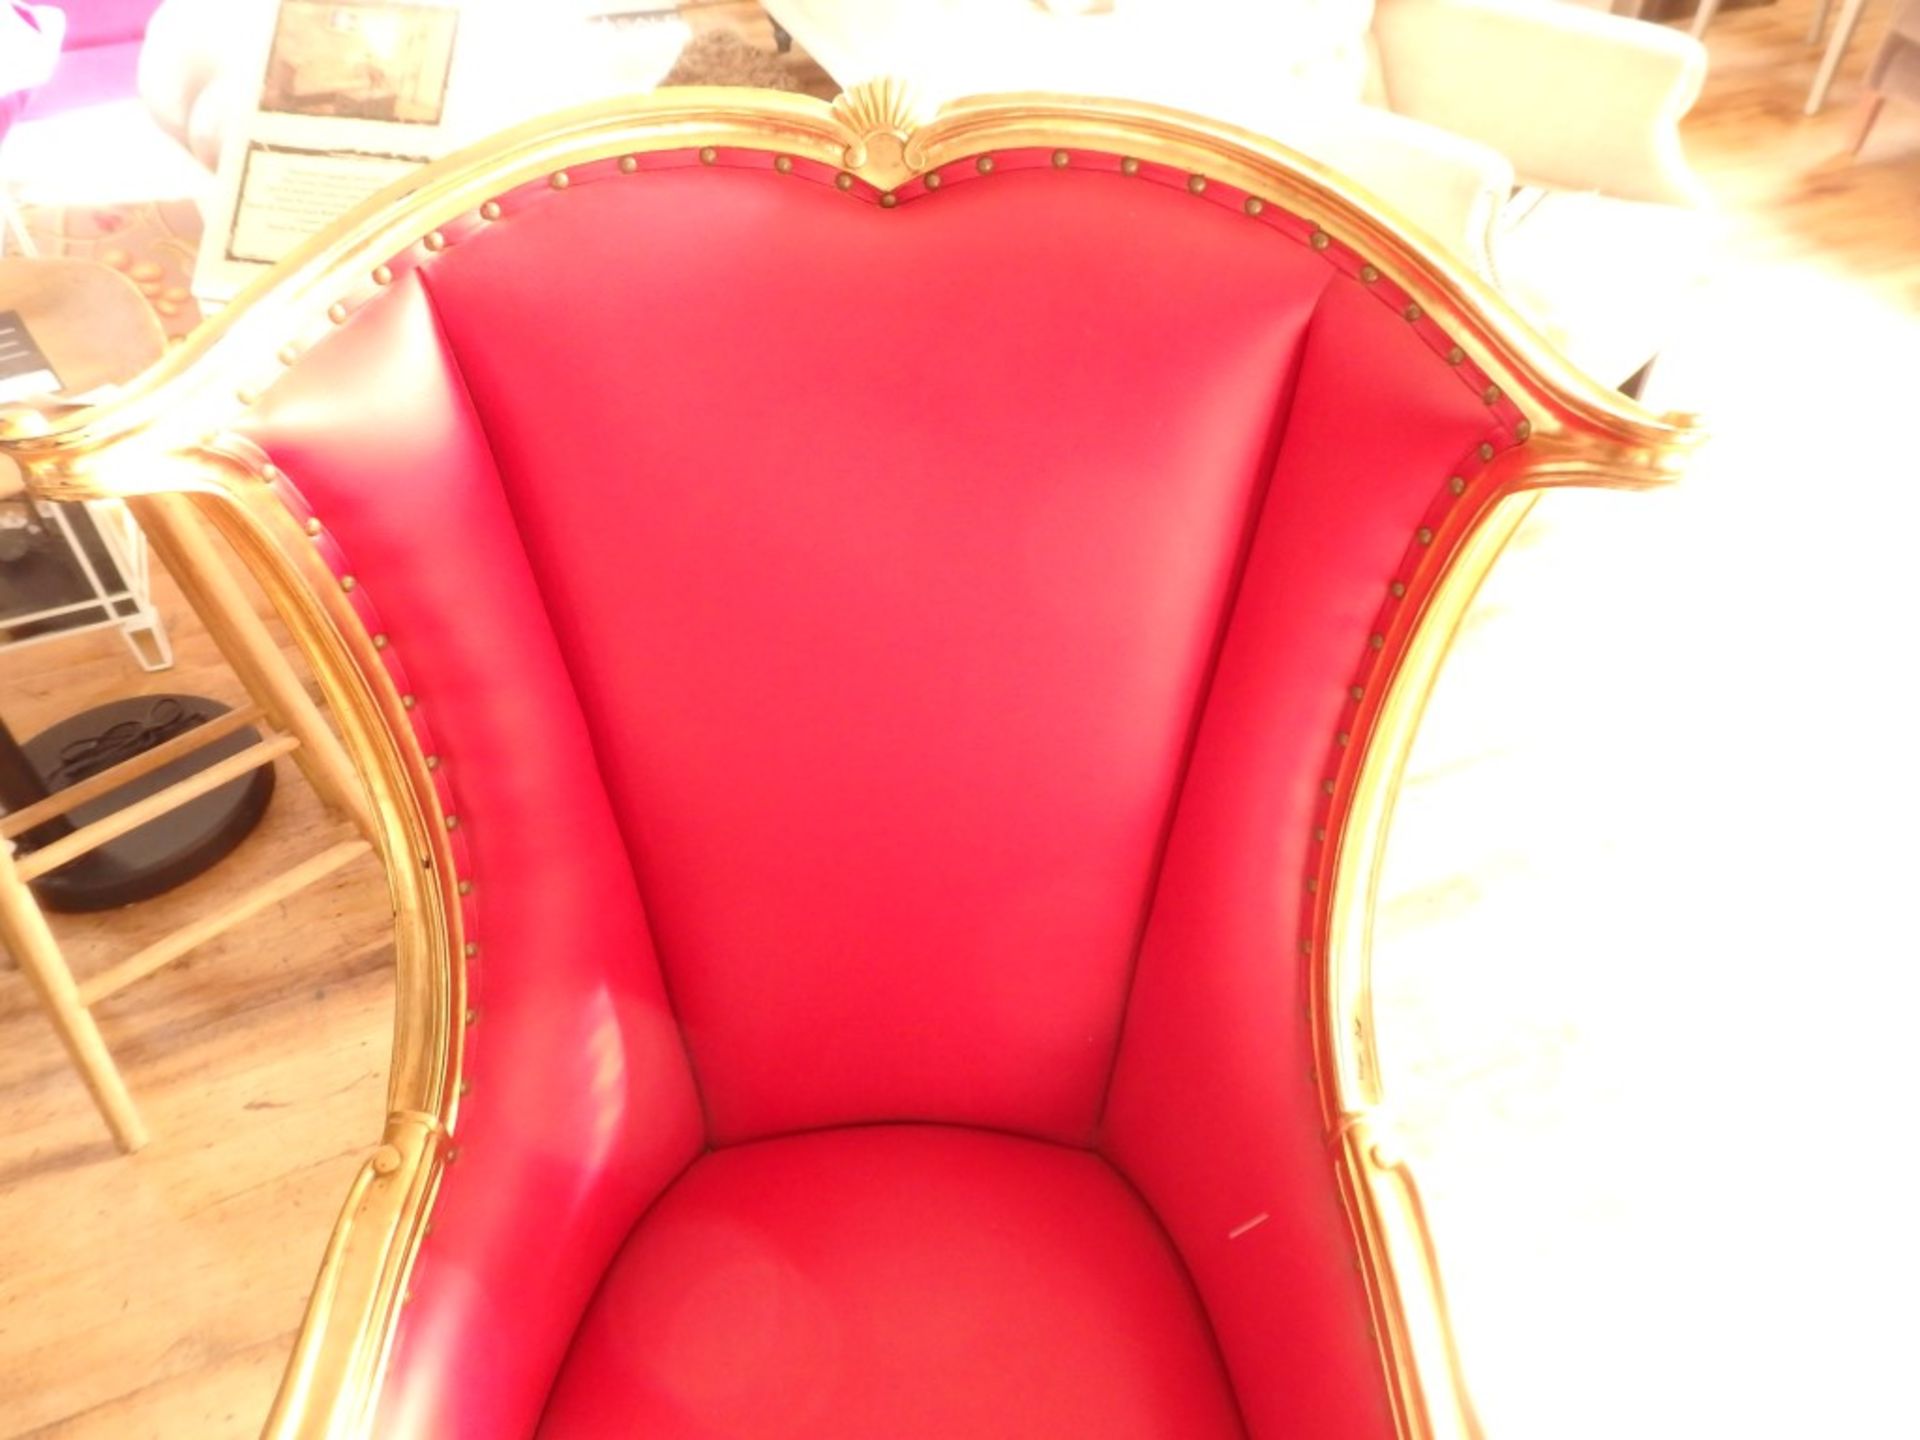 1 x Bespoke Handcrafted Reproduction Chair - Features Red Leather Studded With Gold Finish to - Image 5 of 5